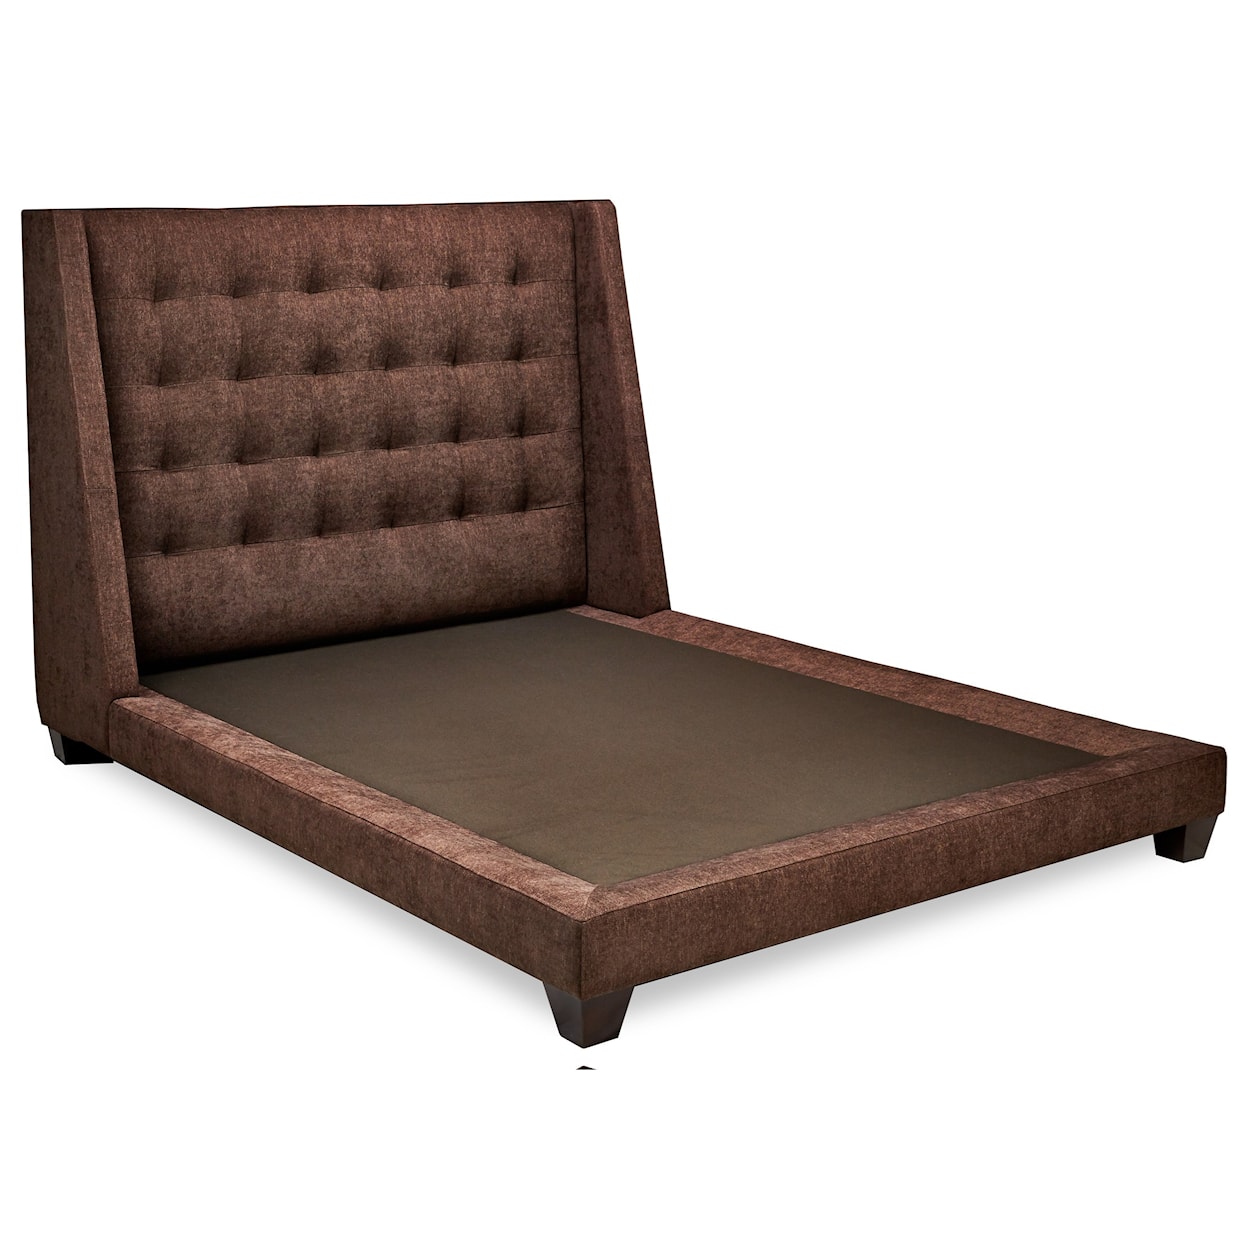 American Leather Shaw California King Upholstered Shelter Bed